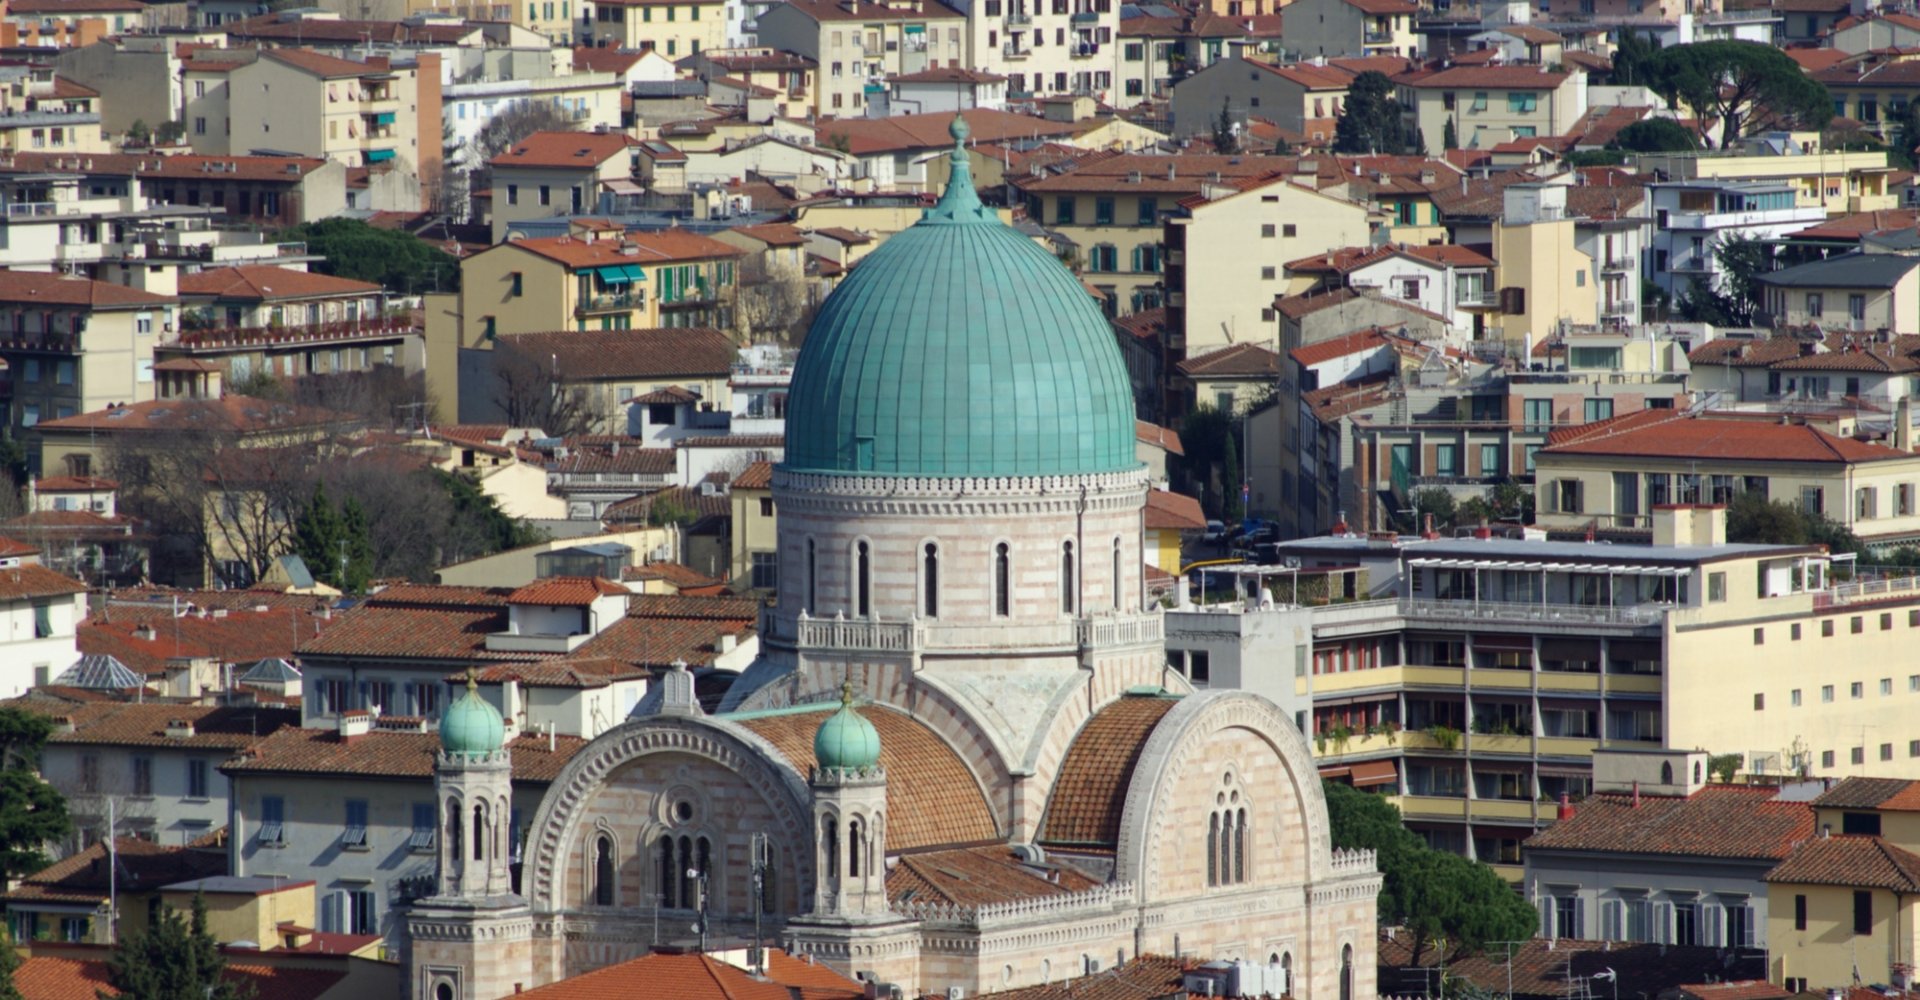 Synagogue of Florence from above